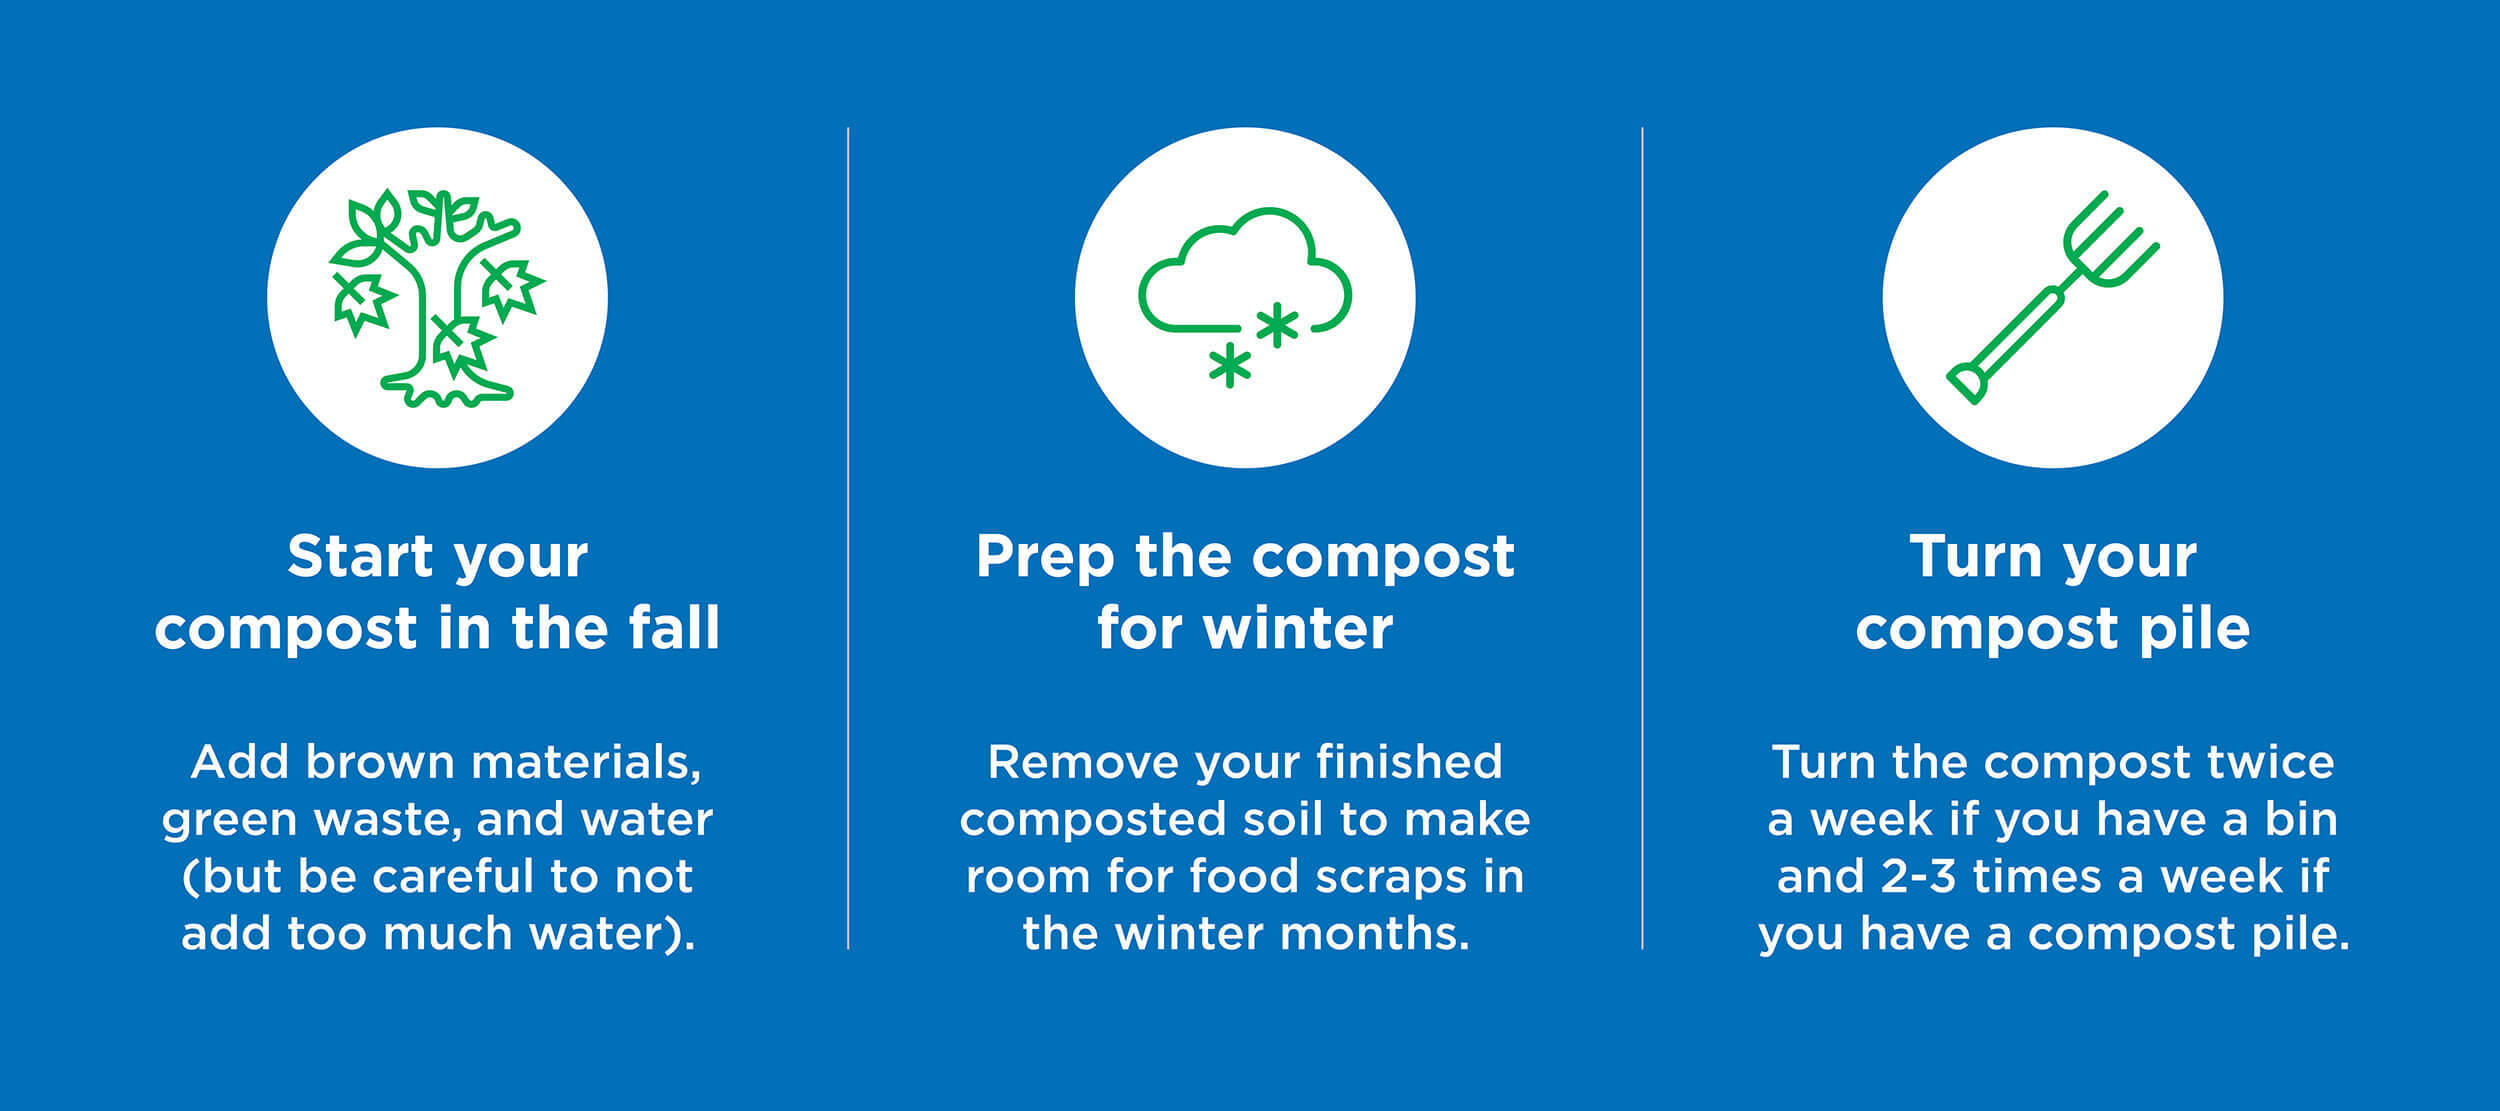 An infographic of the steps to maintain compost piles seasonally.